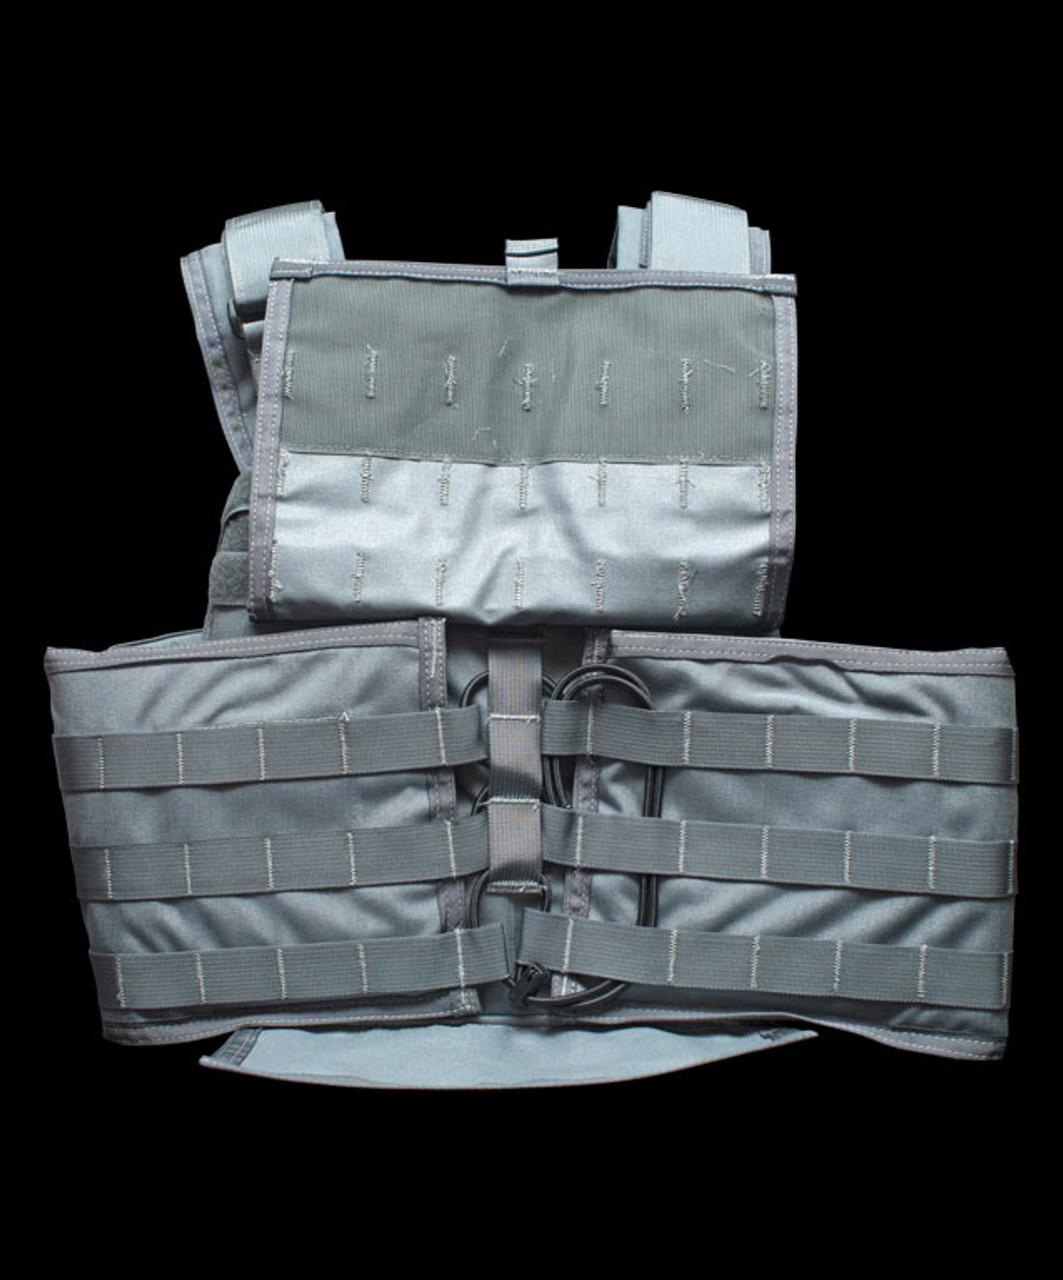 Point Blank FRK 360 GEN II Plate Carrier Ballistic Body Armor Vest, For Military and Police, Available with NIJ .06 Level III and IV Hard Armor Plates